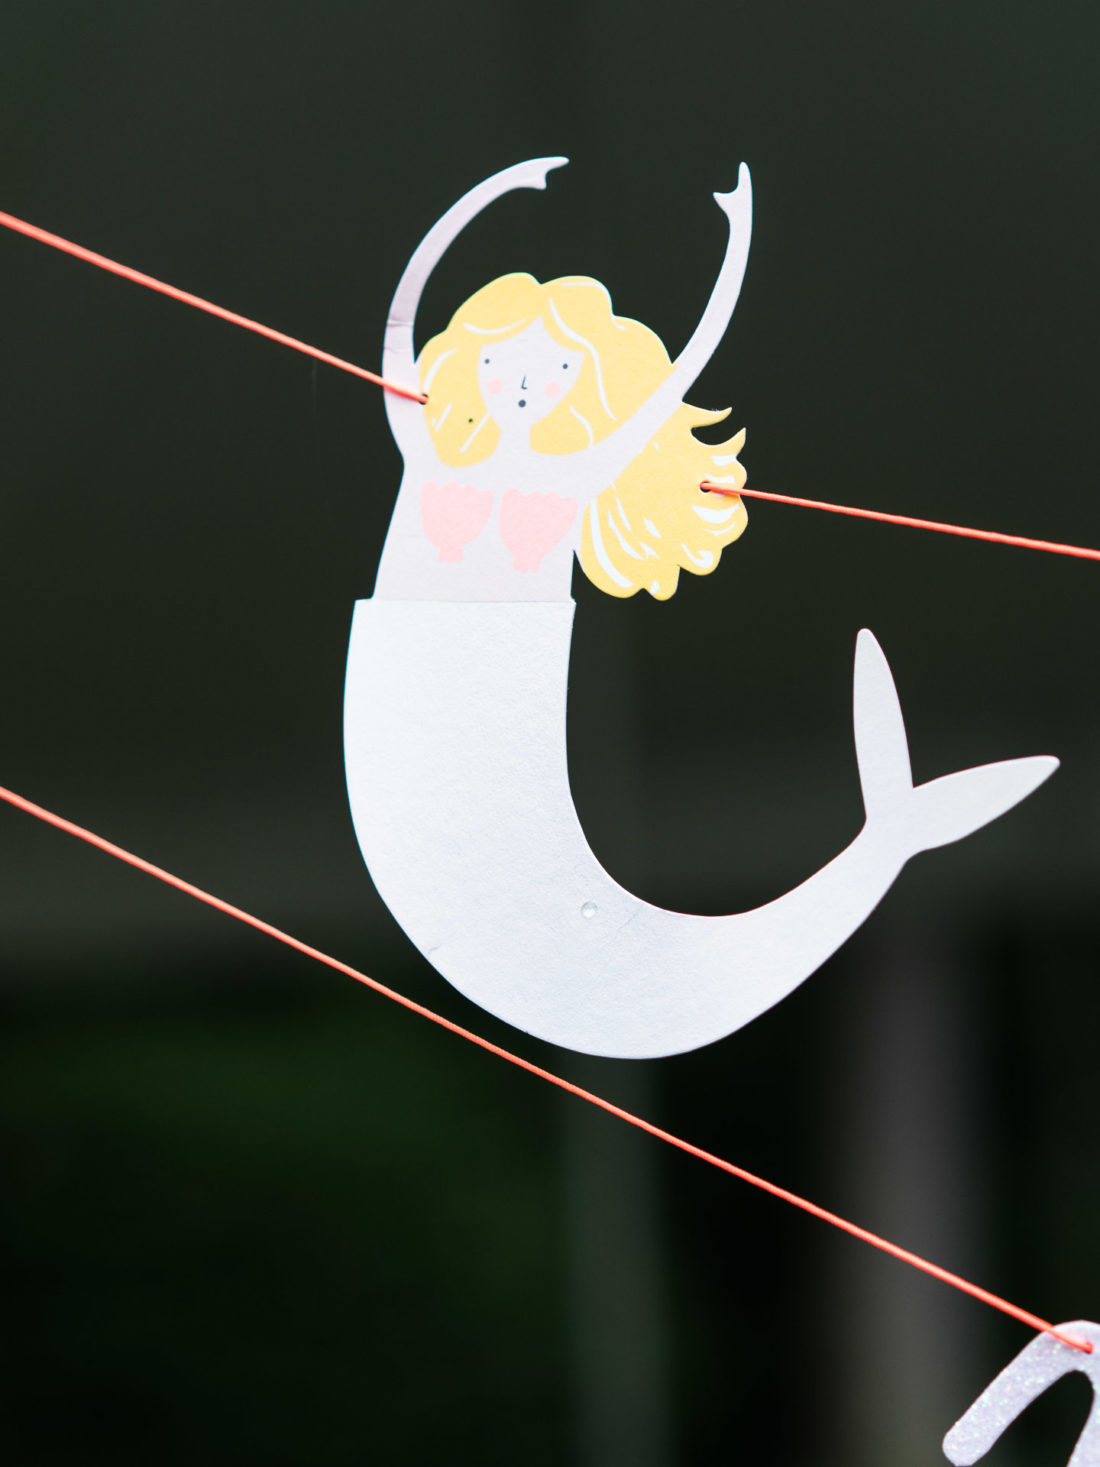 Eva Amurri Martino decorates the backyard of her Connecticut home for daughter Marlowe's 3rd birthday party with a Sharks vs. Mermaids theme